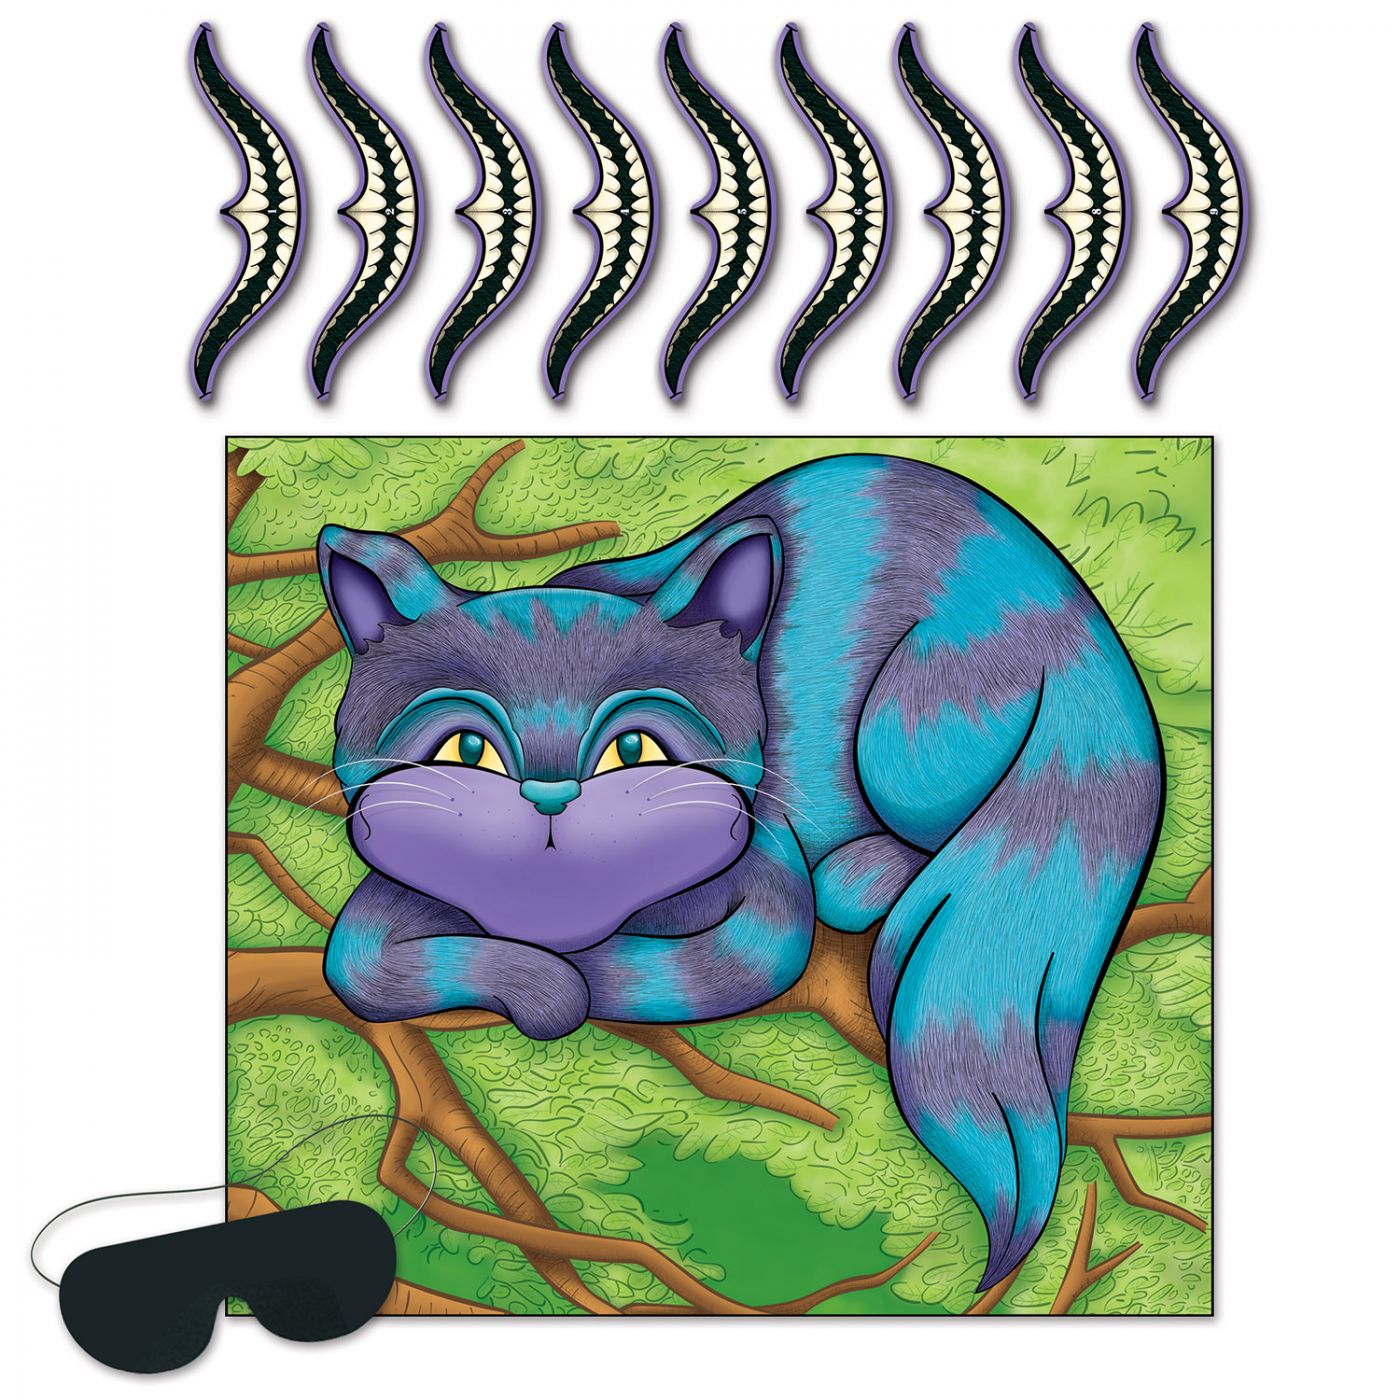 Pin The Smile On The Cheshire Cat Game (24) image